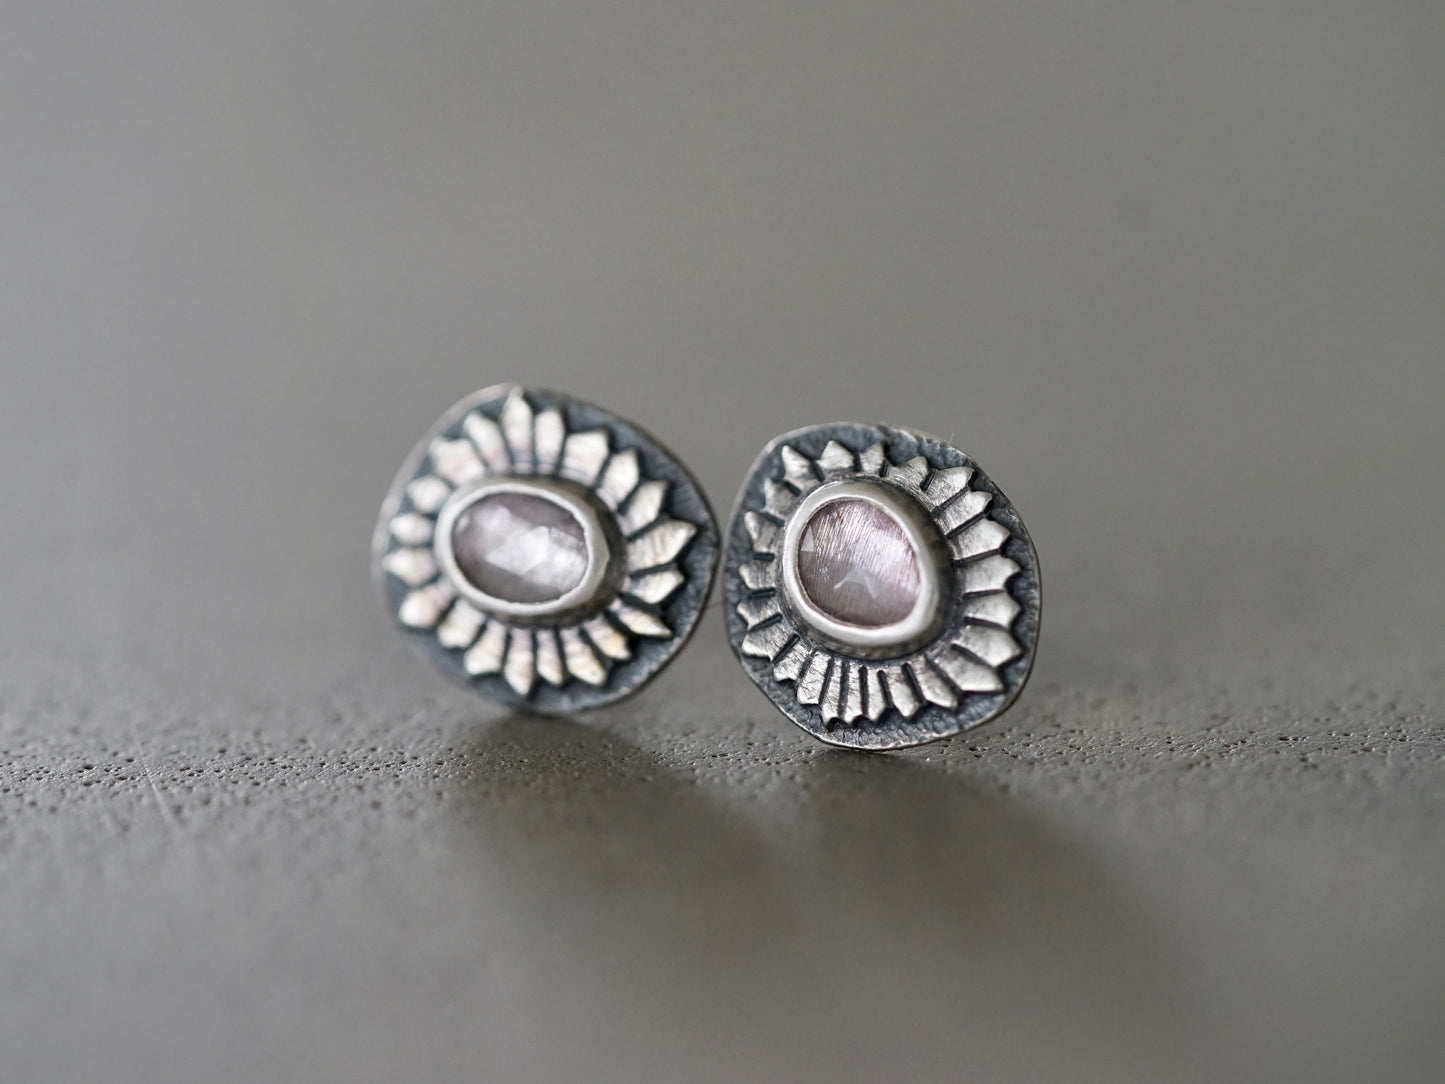 Lavender spinel and sterling silver floral earrings